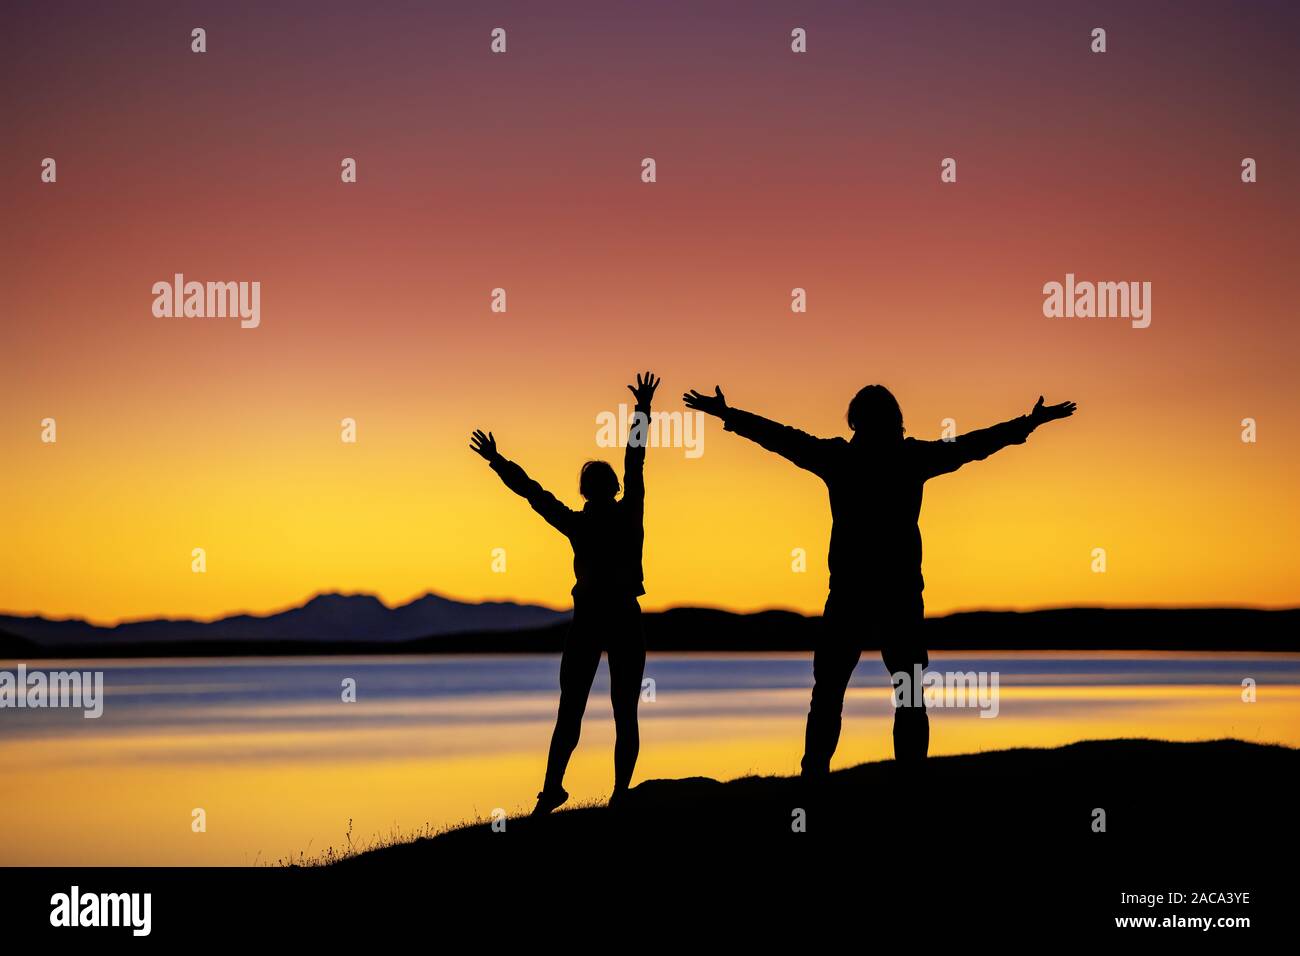 Silhouettes of two hikers stands in winner pose with raised arms against sunset lake and mountains Stock Photo